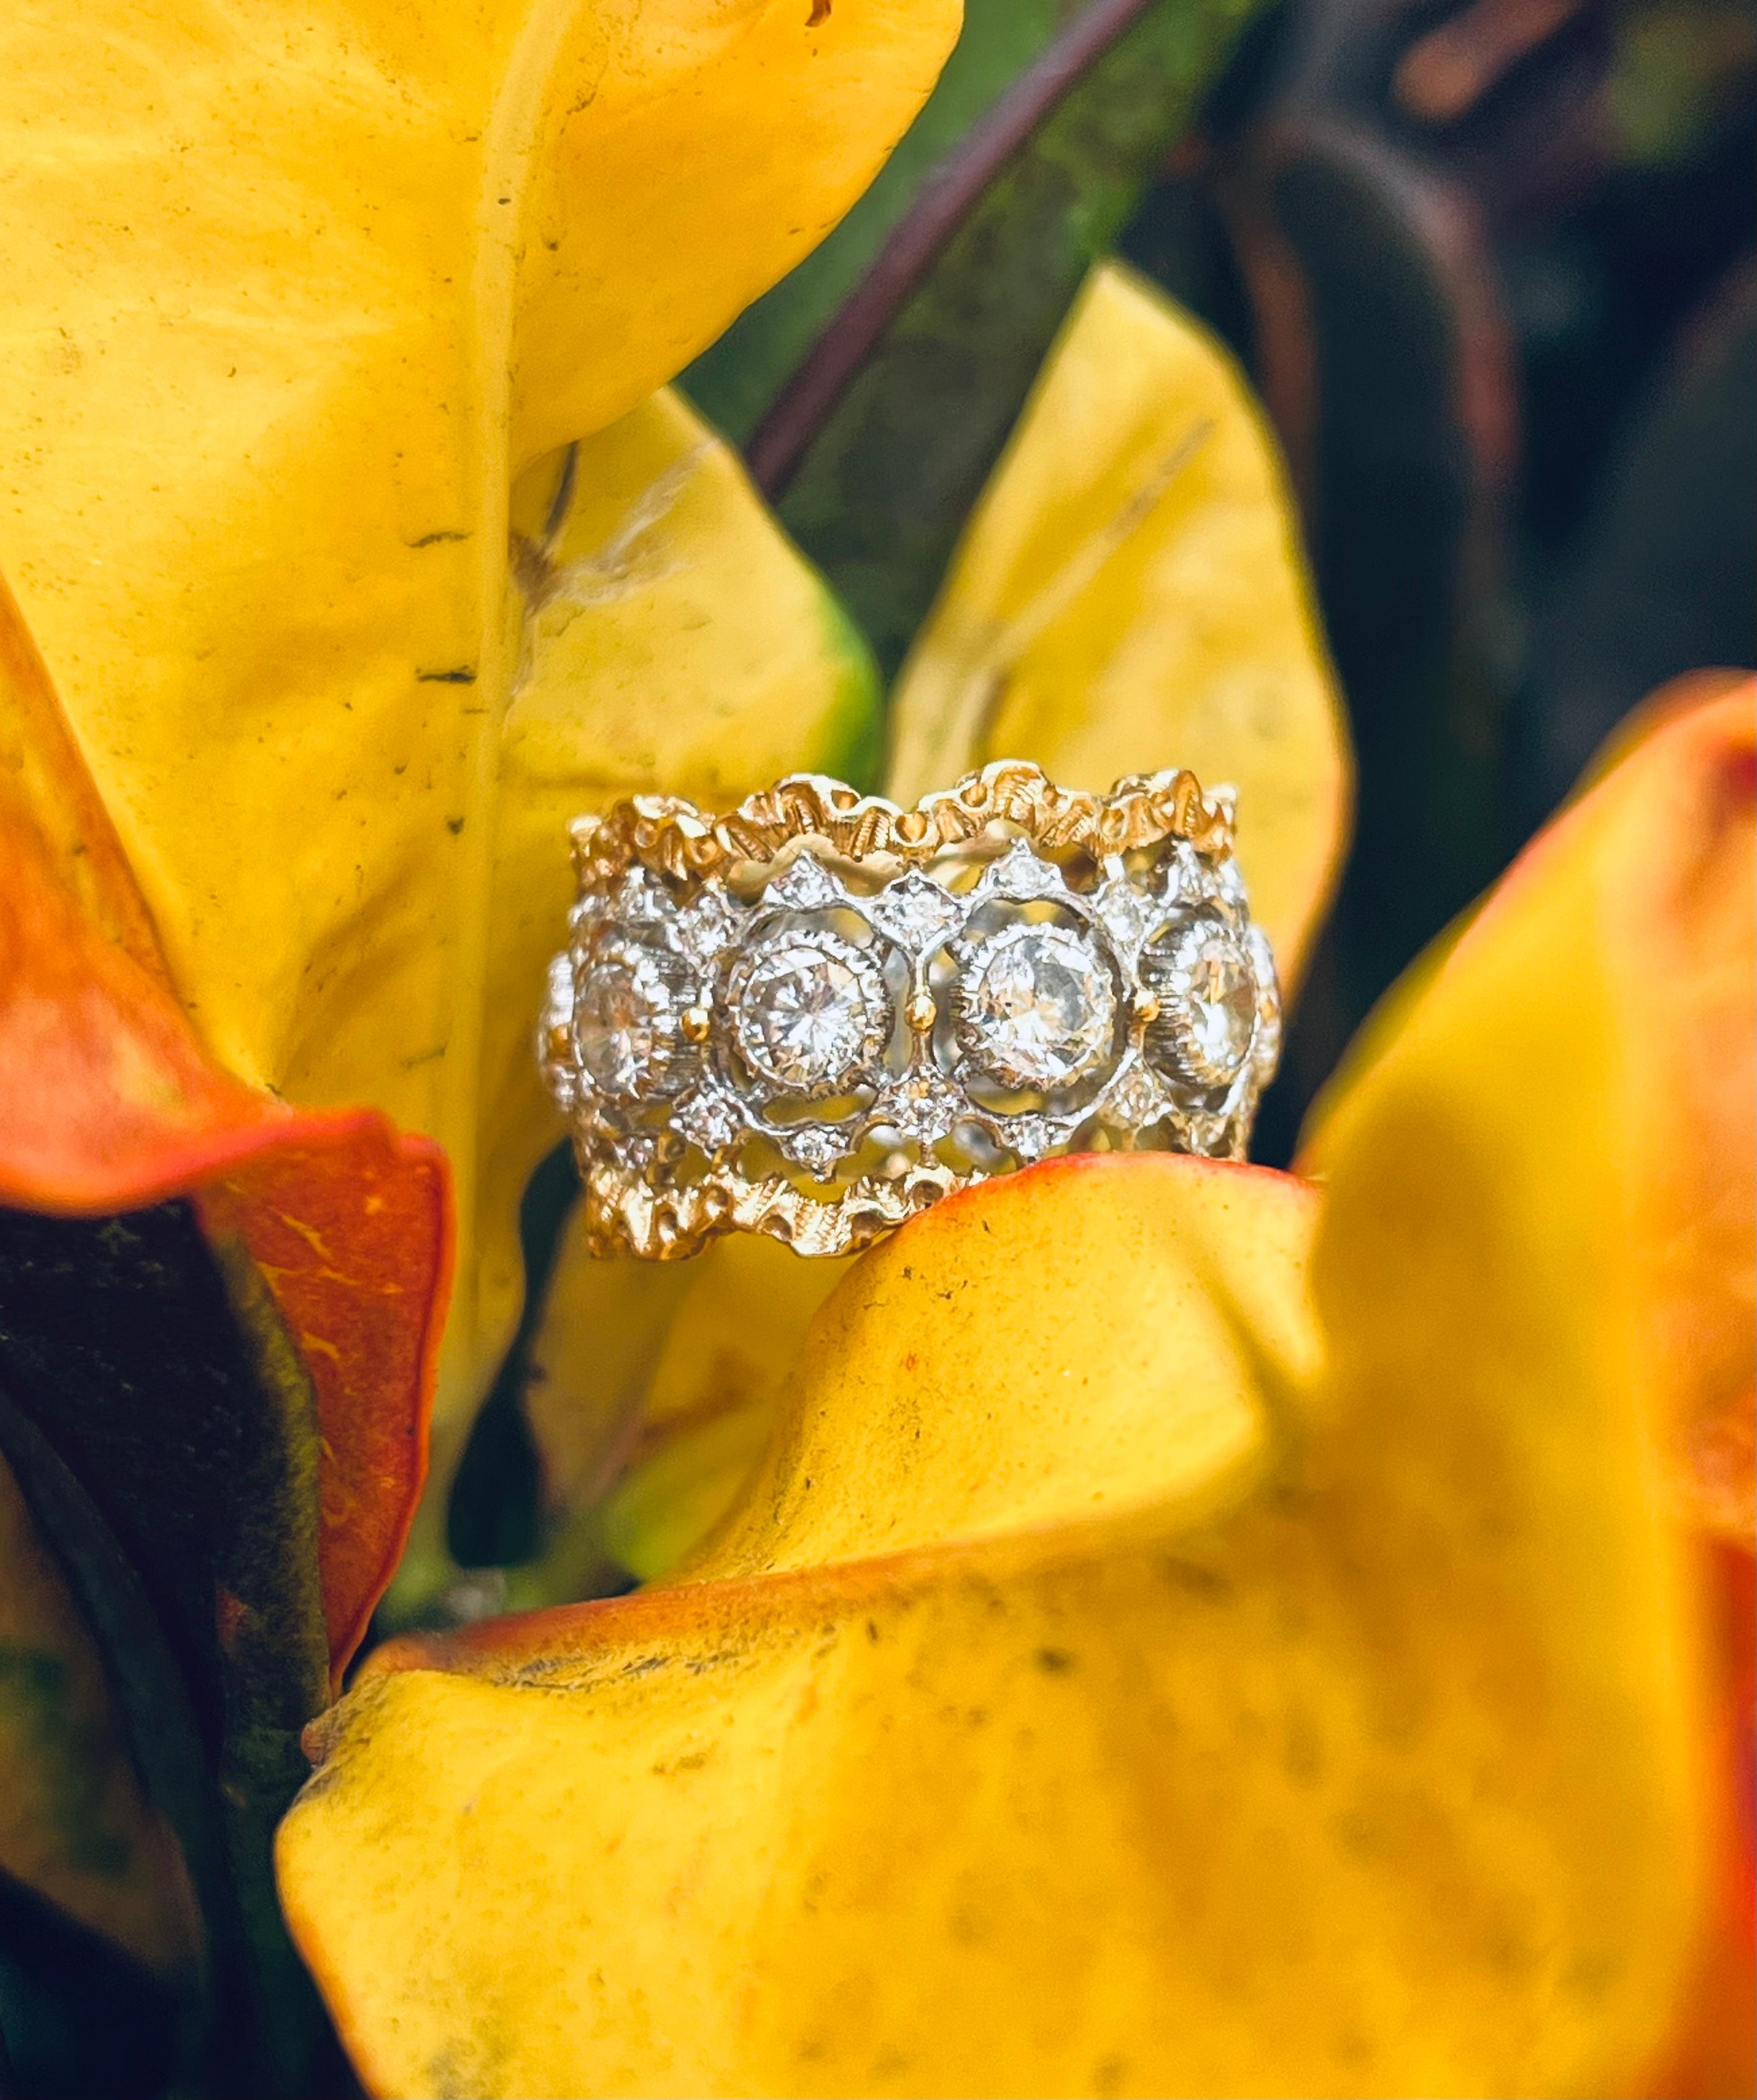 Beautiful ring by famed Italian designer Buccellati. From the Rombi Eternelle collection this ring is truly fantastic, although this design is still made, this model showcases larger diamonds throughout the ring then the design sold in store